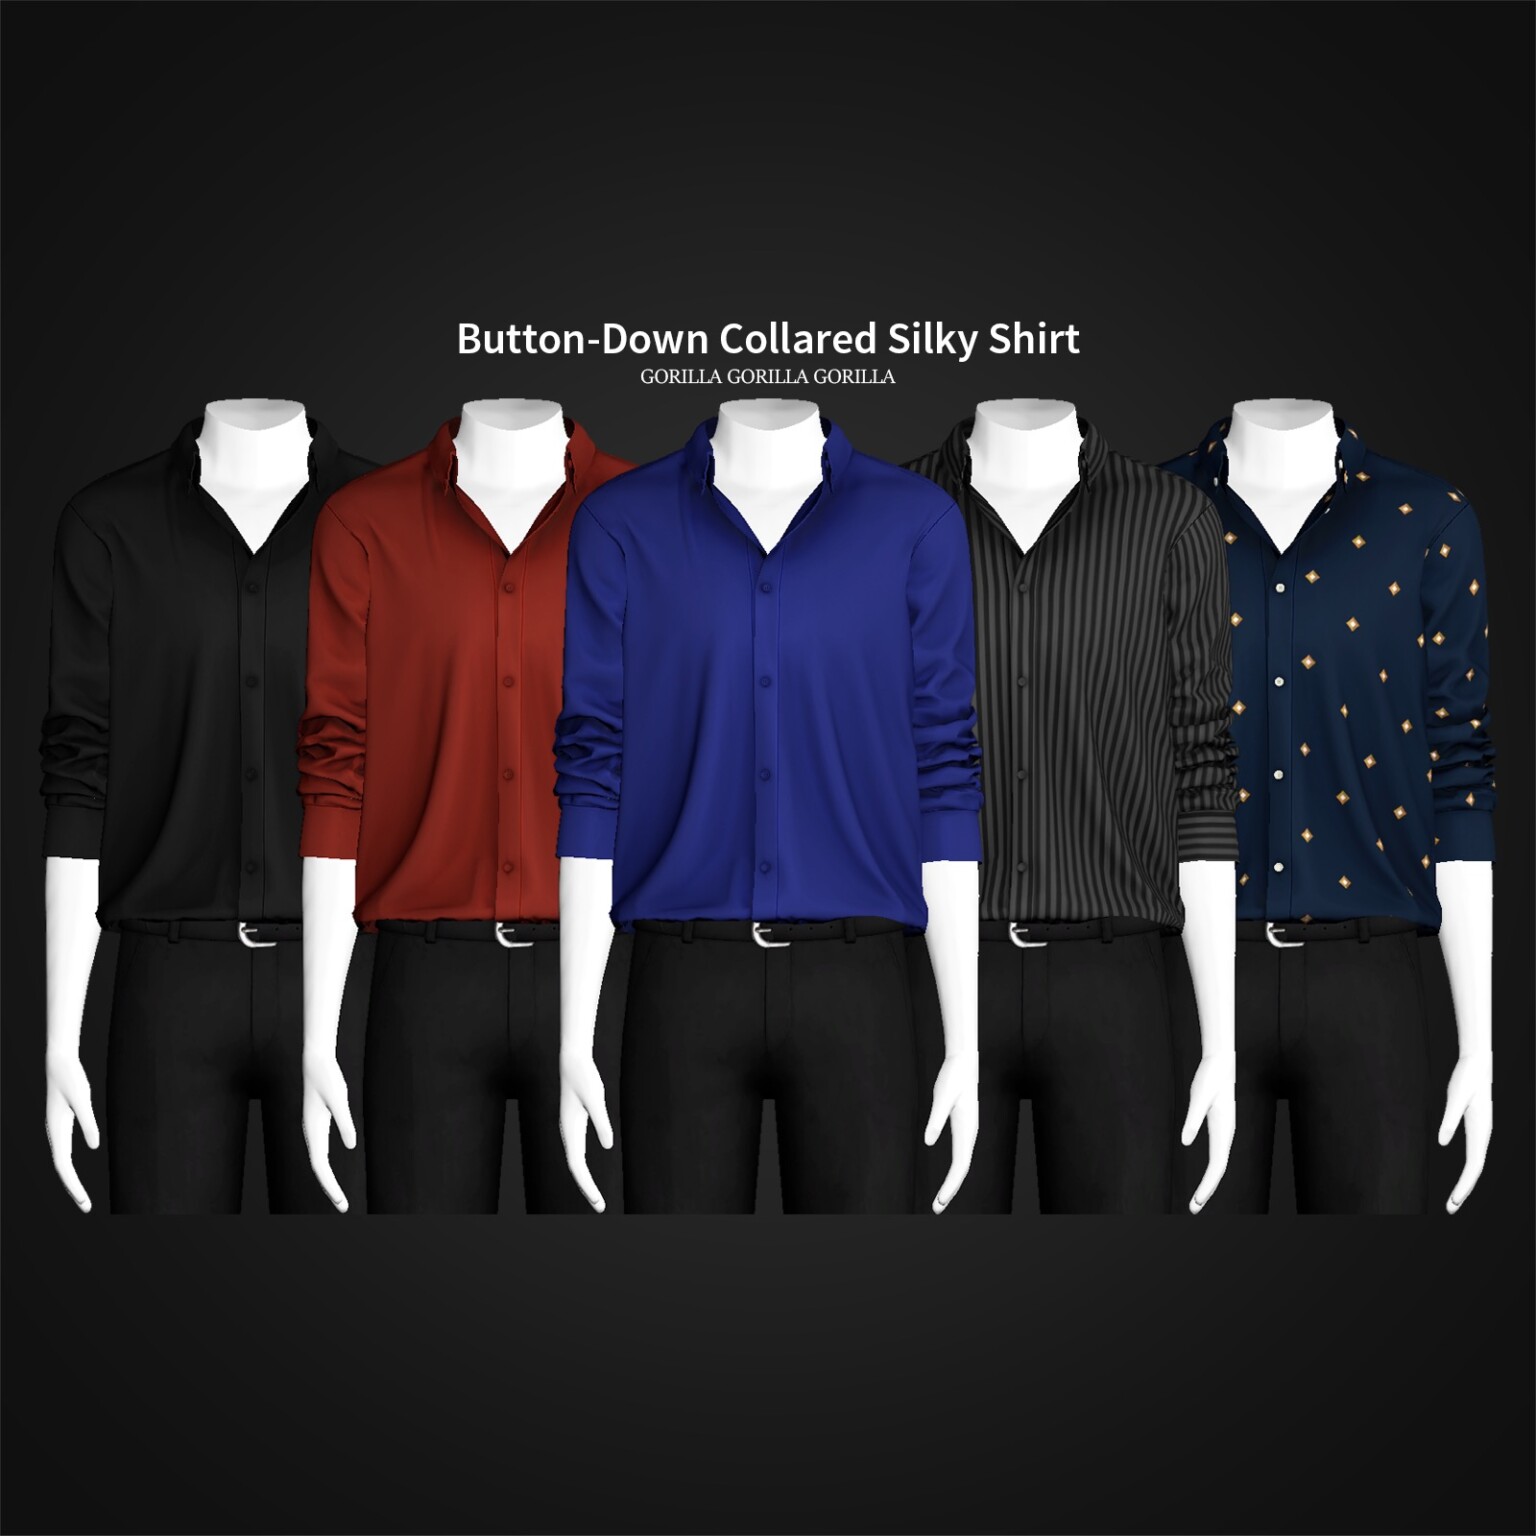 Sims 4 Clothing for males - Sims 4 Updates » Page 6 of 1046